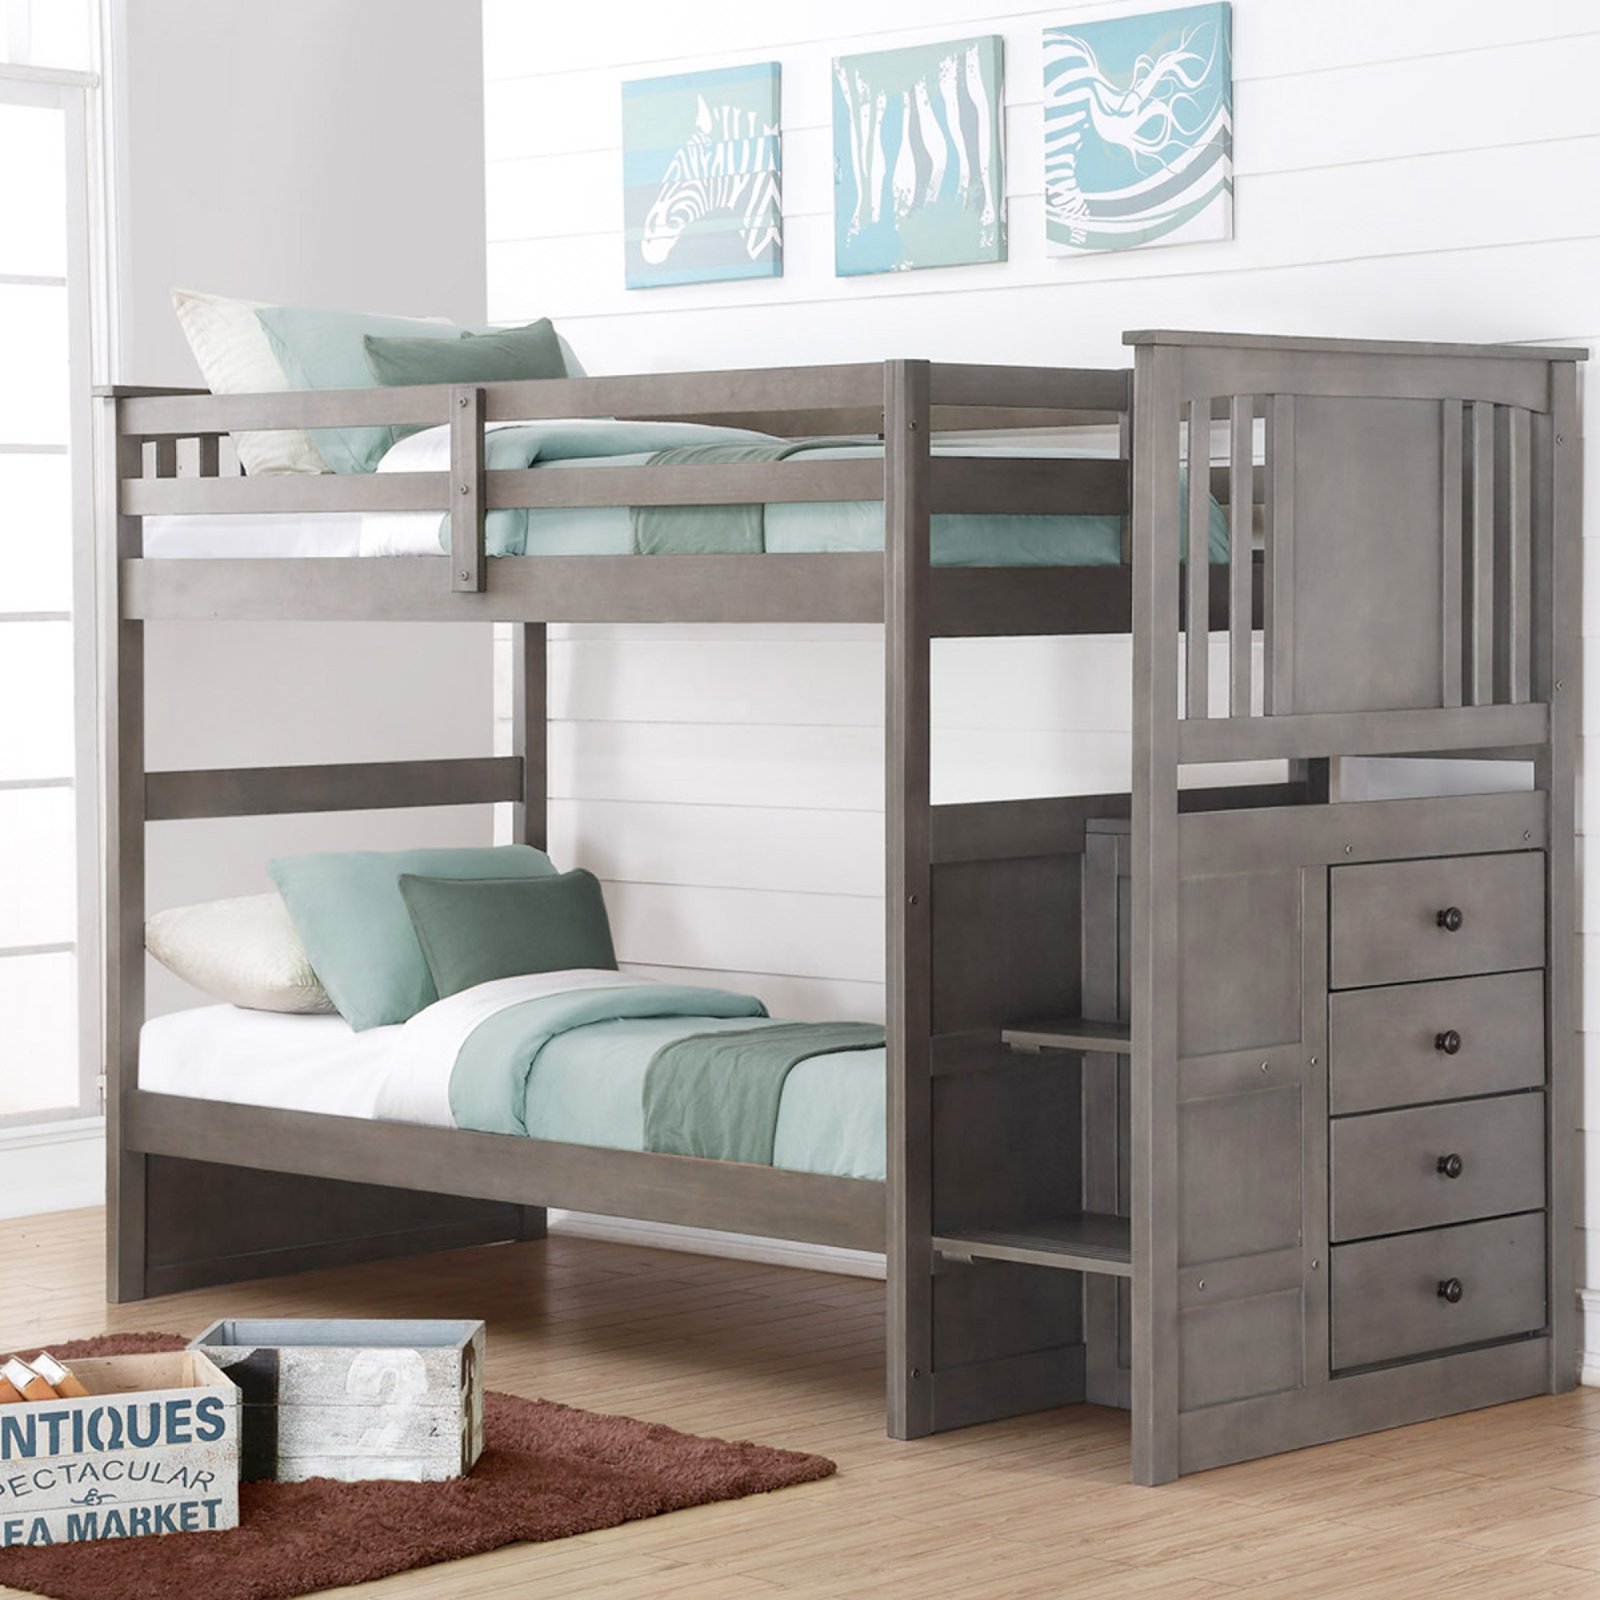 Photo 1 of Donco Kids Princeton Twin Over Twin or Twin Over Full Stairway Storage Bunk Bed in Slate Grey
MISSING COMPONENTS 4DRAWER STORAGE CASE ONLY DAMAGED AND BROKEN